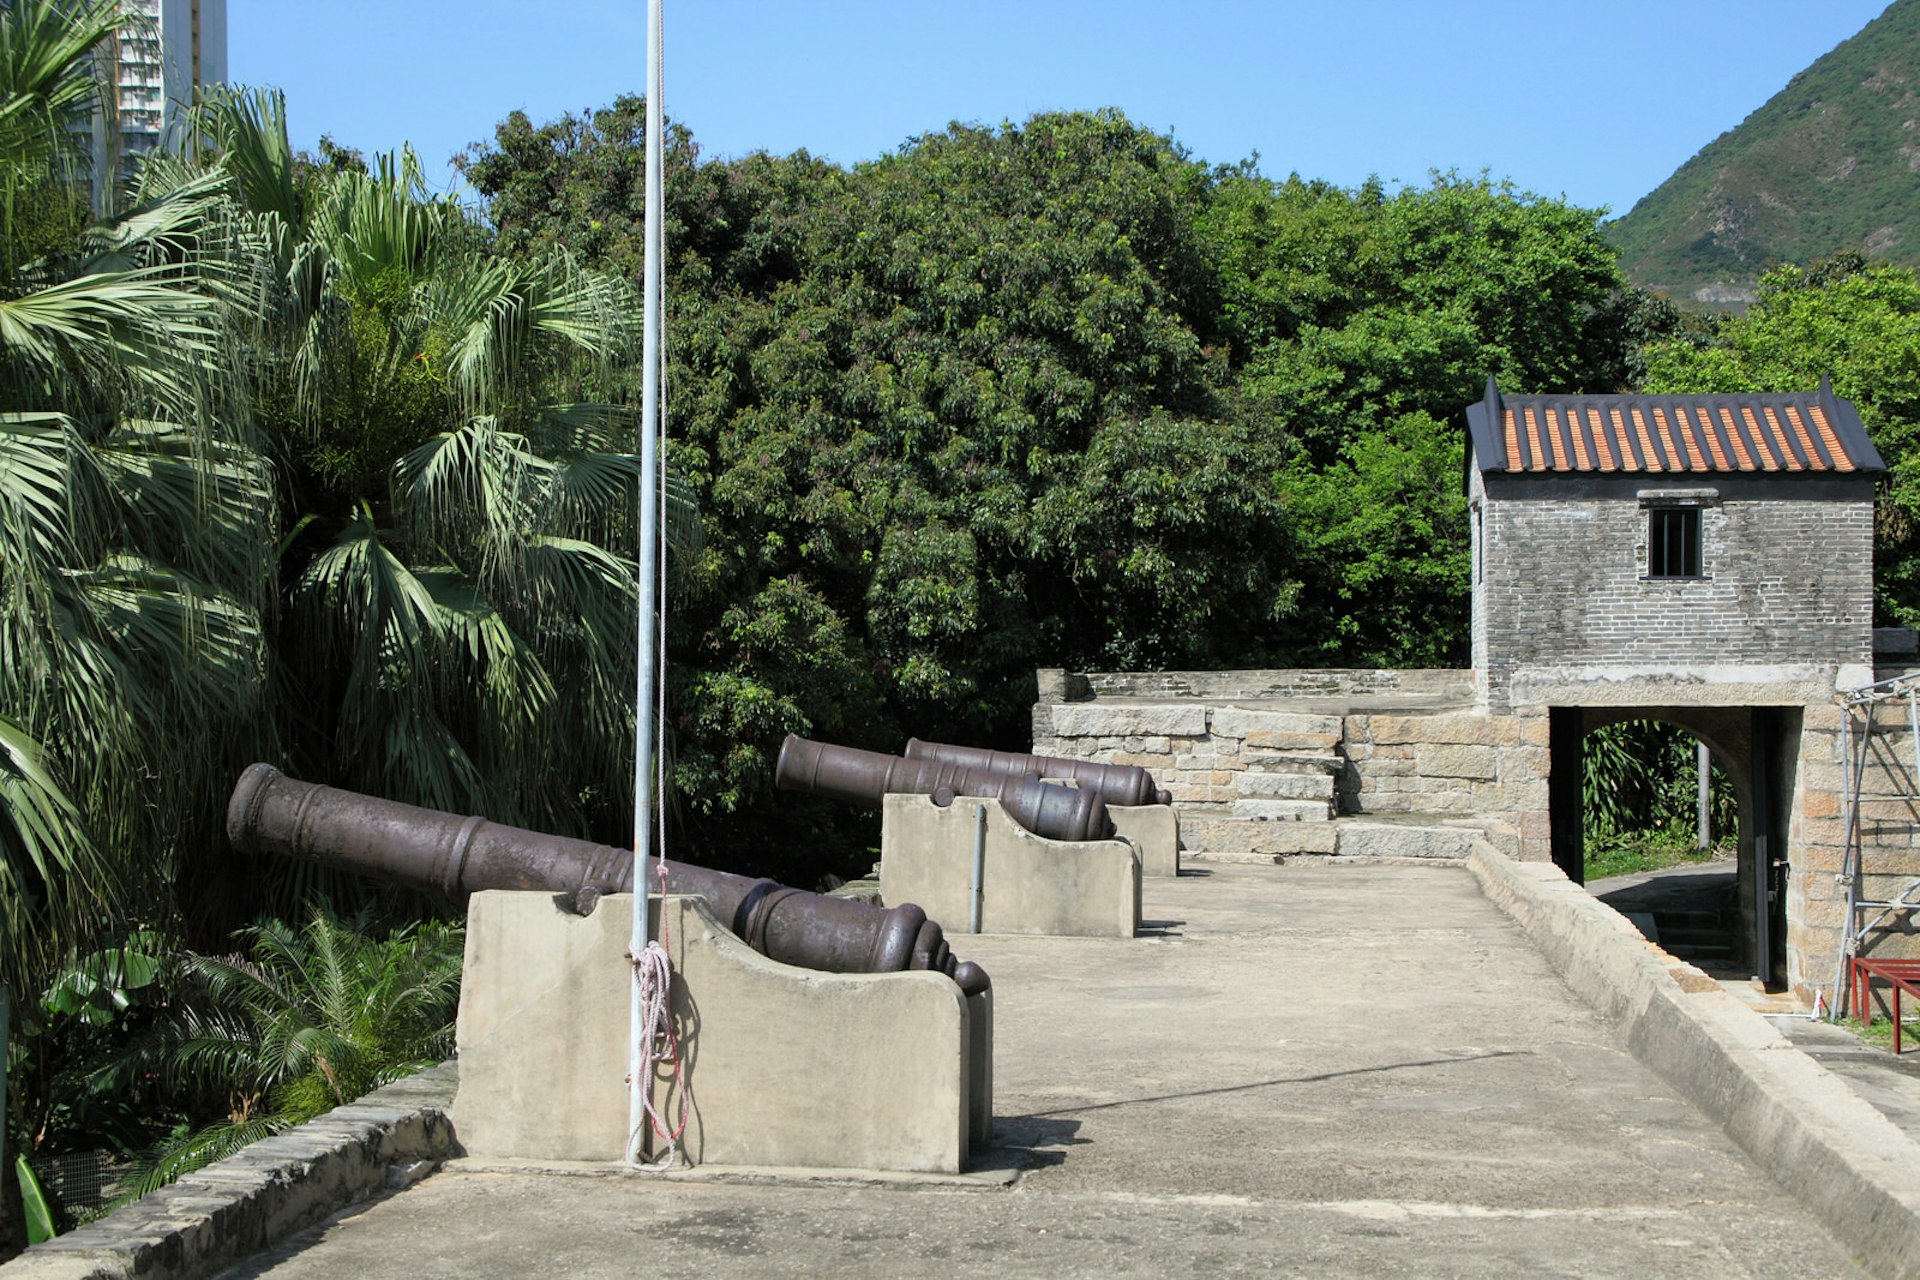 Cannons line the ramparts at Tung Chung Fort